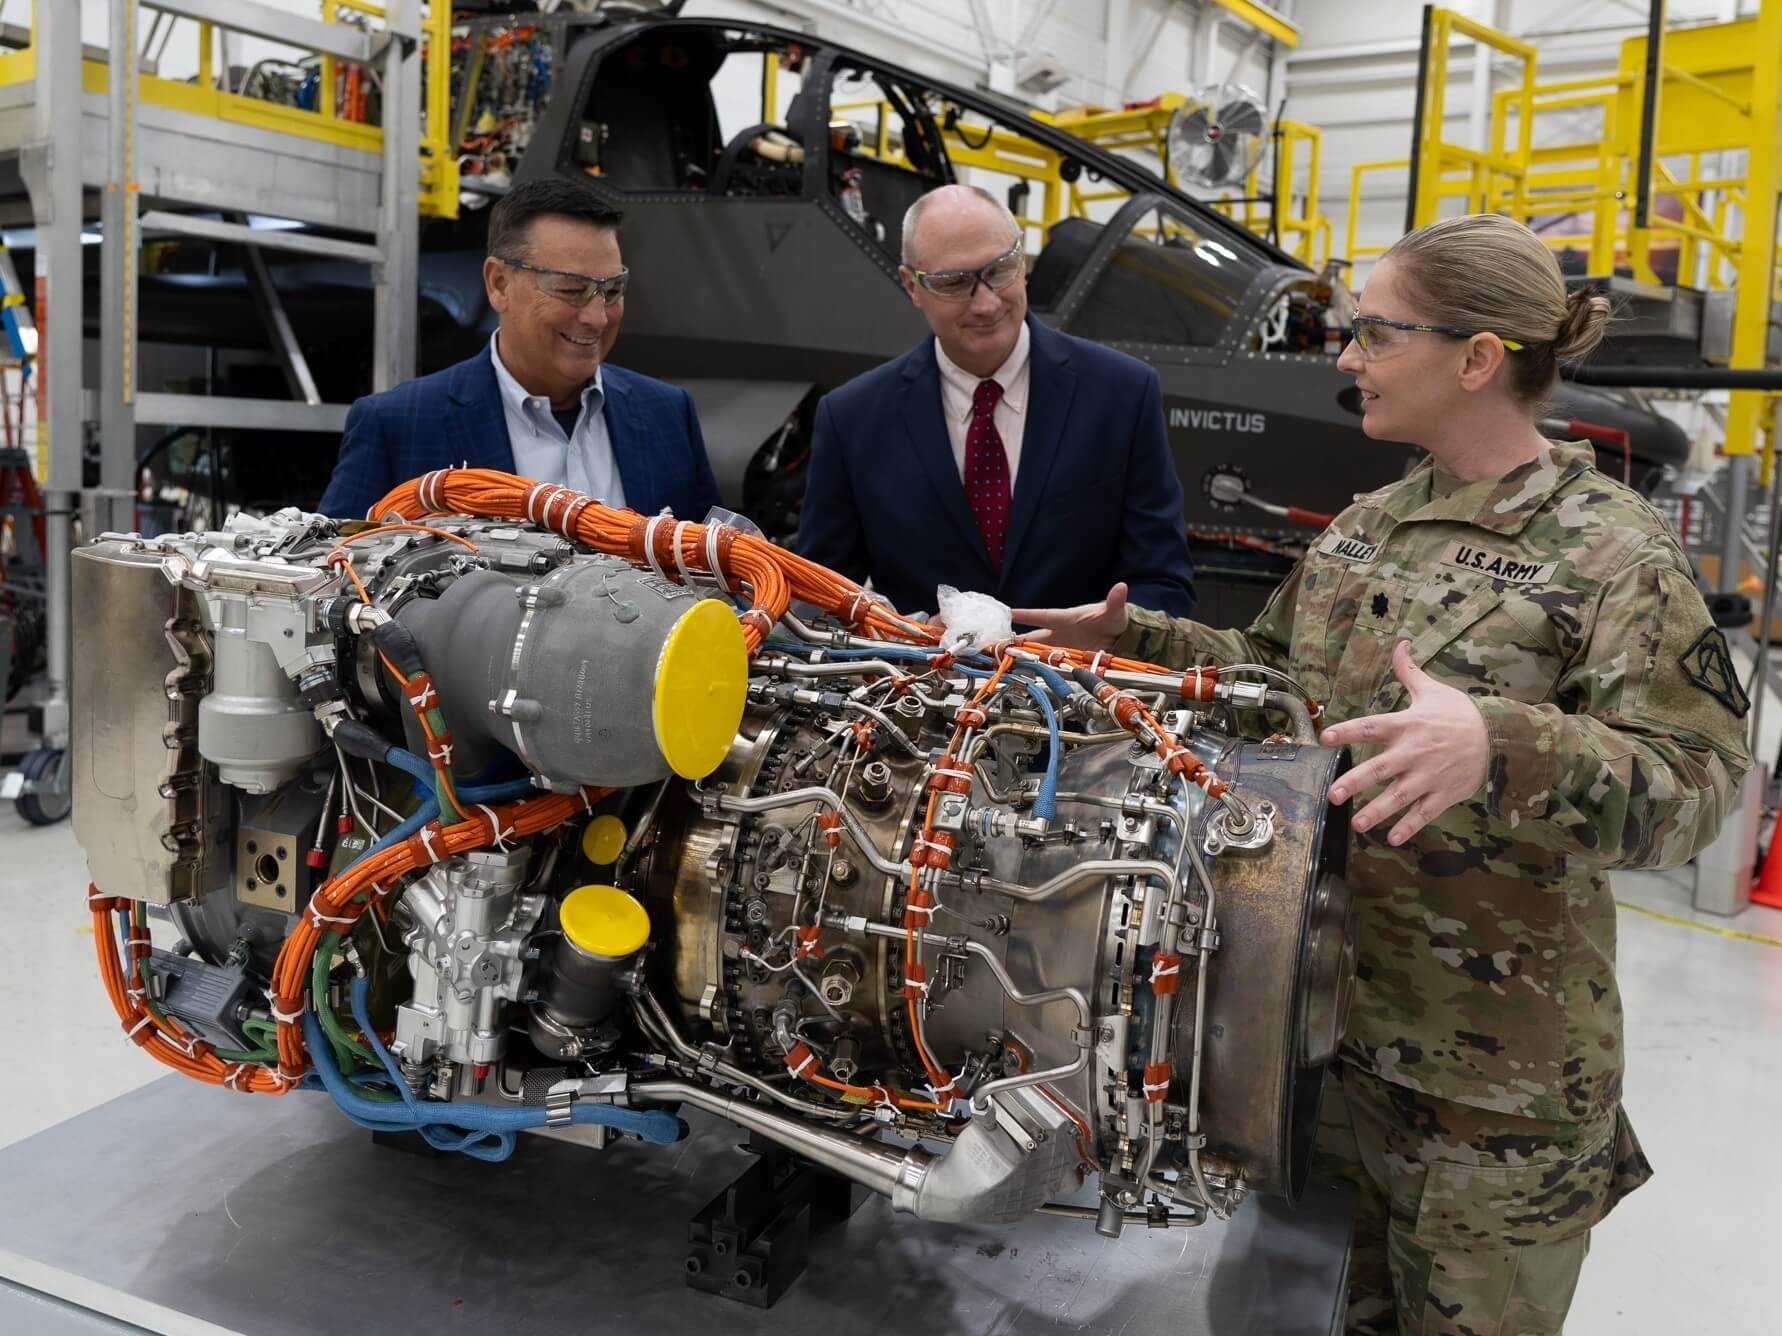 Lt. Col. Kelley Nalley, the Improved Turbine Engine Product Manager (right) discusses the recently delivered T901 engine with Bell senior vice president Chris Gehler (left), and Richard Crabtree, PM Future Attack Reconnaissance Aircraft program integrator. The Army delivered the T901 Improved Turbine Engine to Bell’s Fort Worth, Texas, plant on Oct. 20. U.S. Army Photo